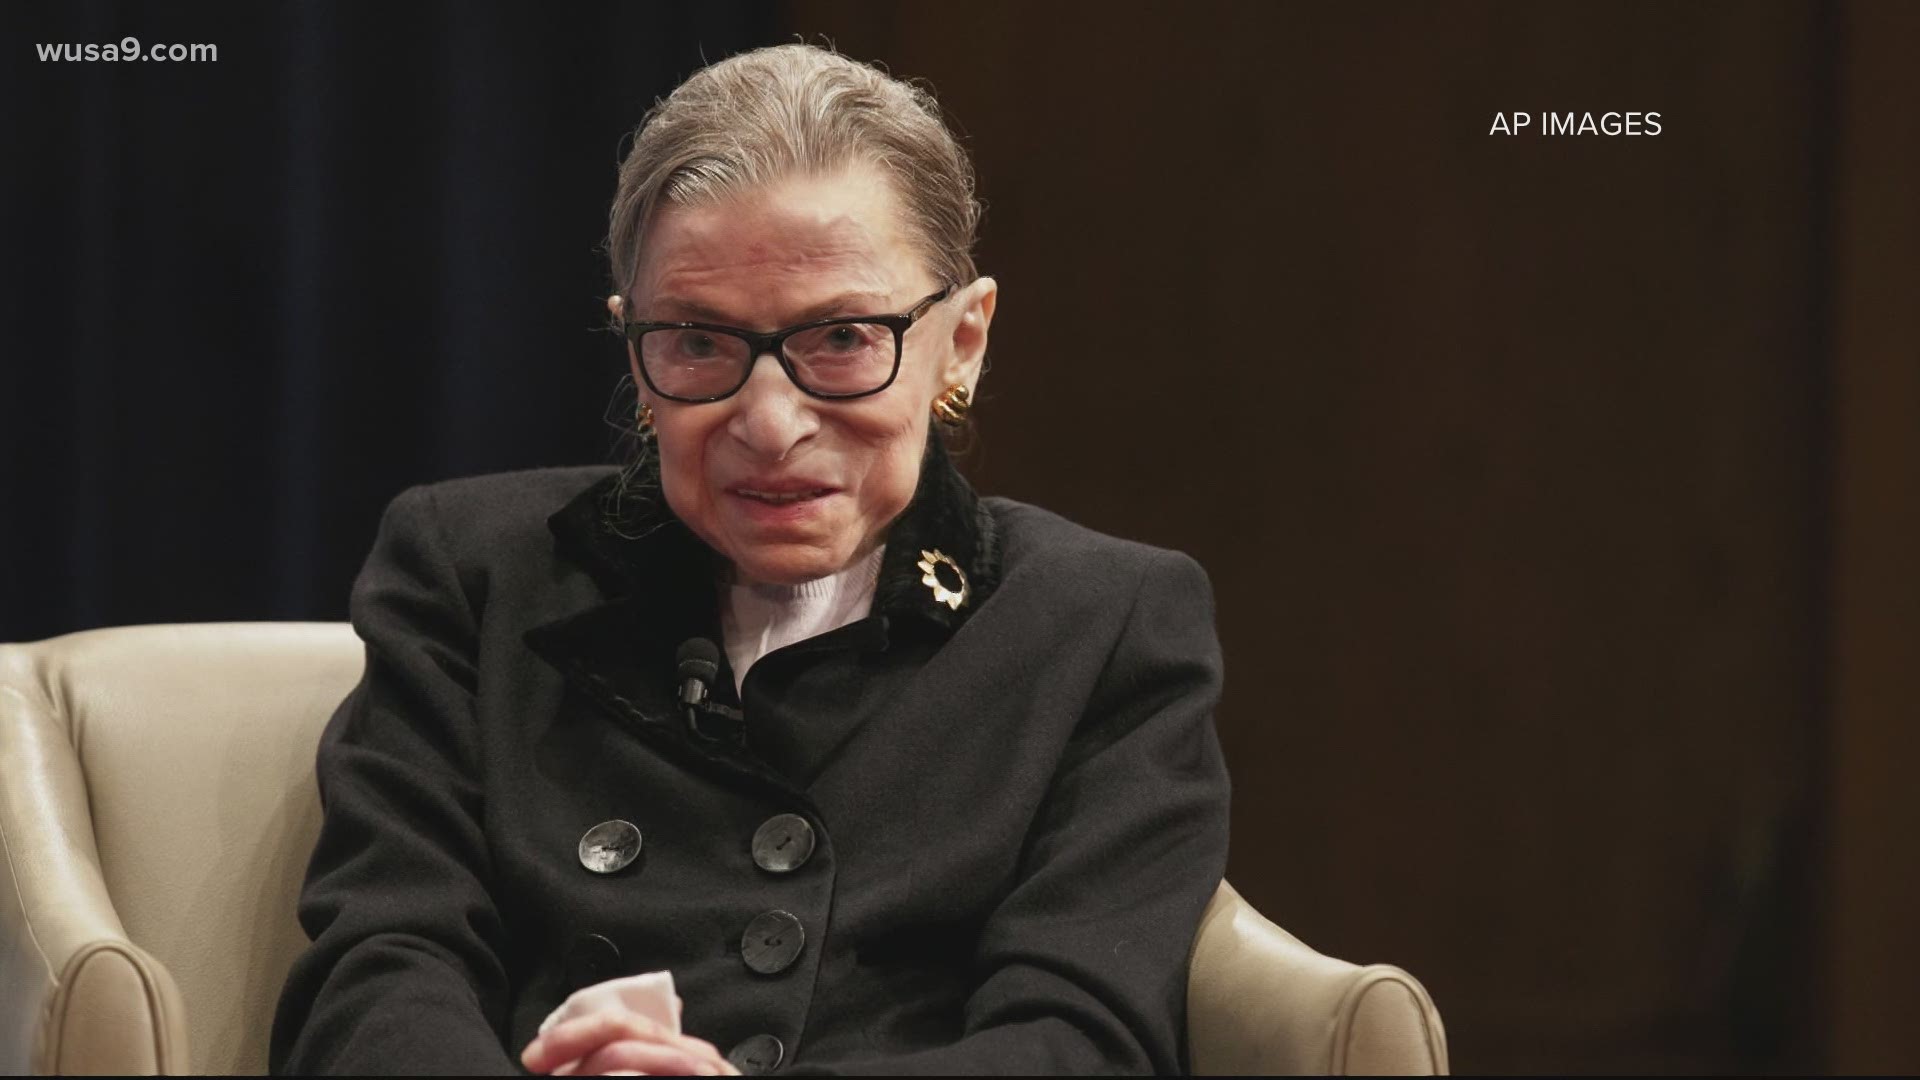 Following the death of Supreme Court Justice Ruth Bader Ginsburg, women attorneys around DC spoke to WUSA9 about the inspiration Ginsburg provided them.